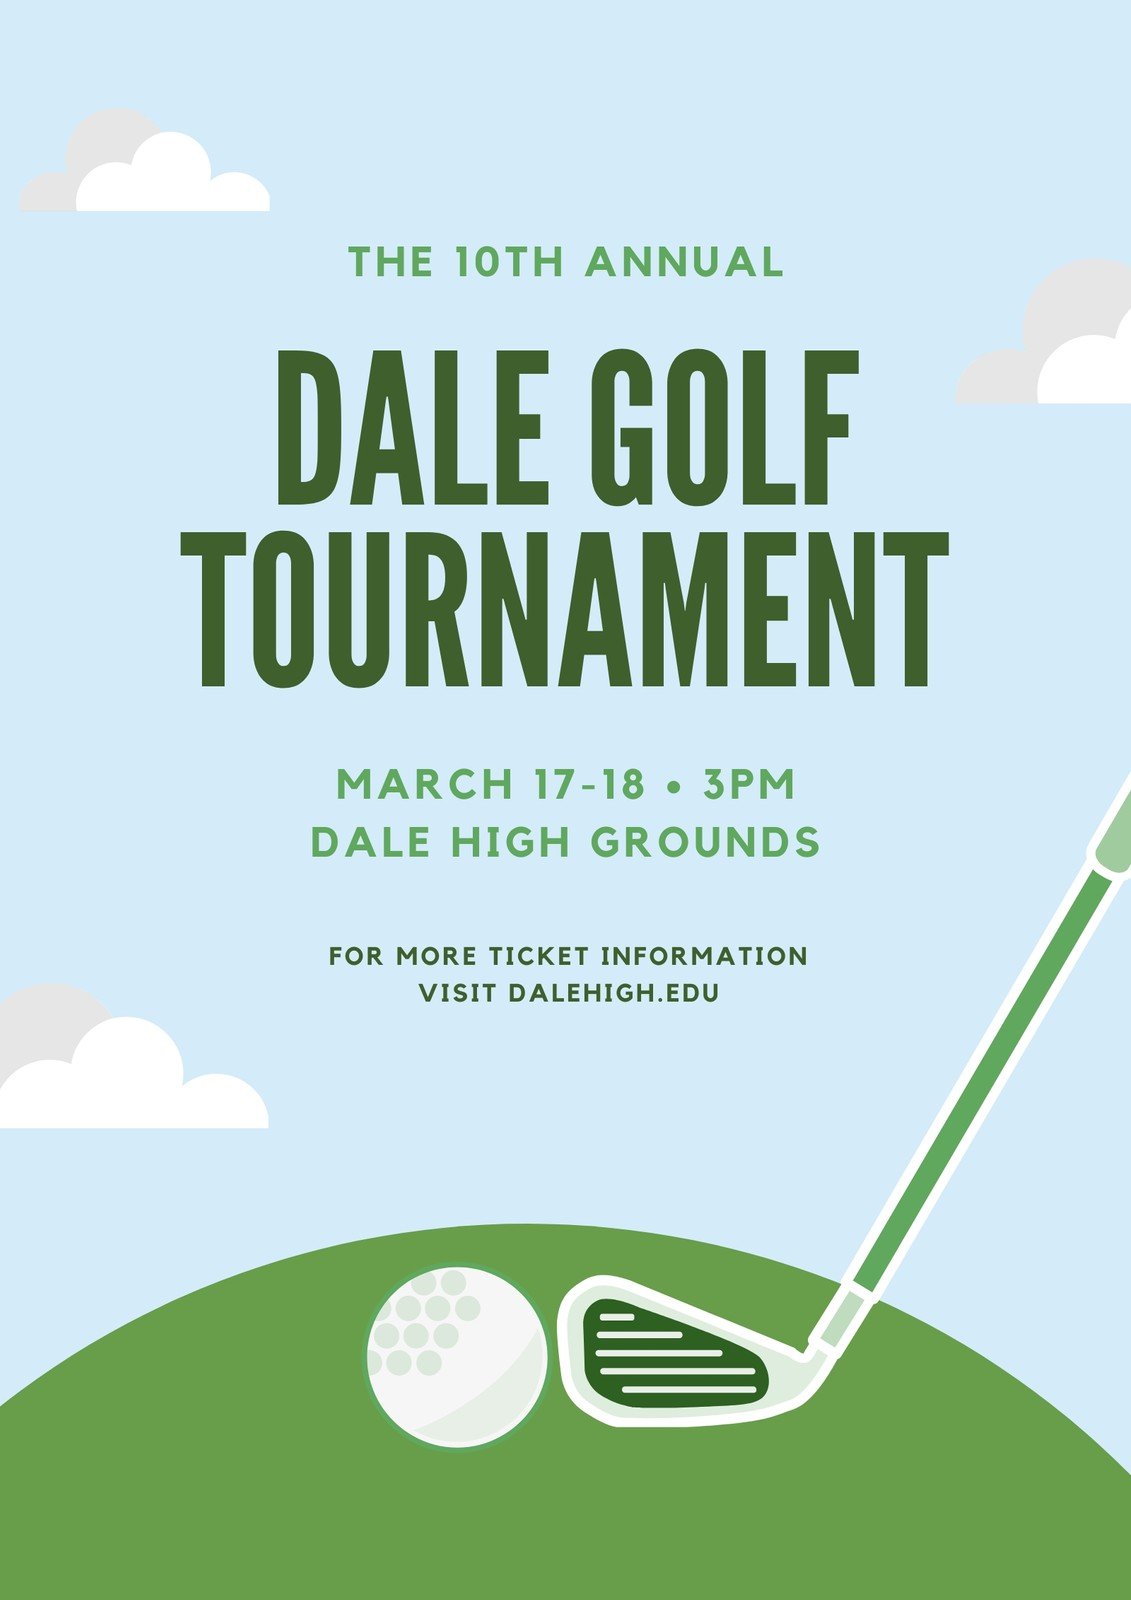 Charity Golf Tournament Poster Template and Ideas for Design